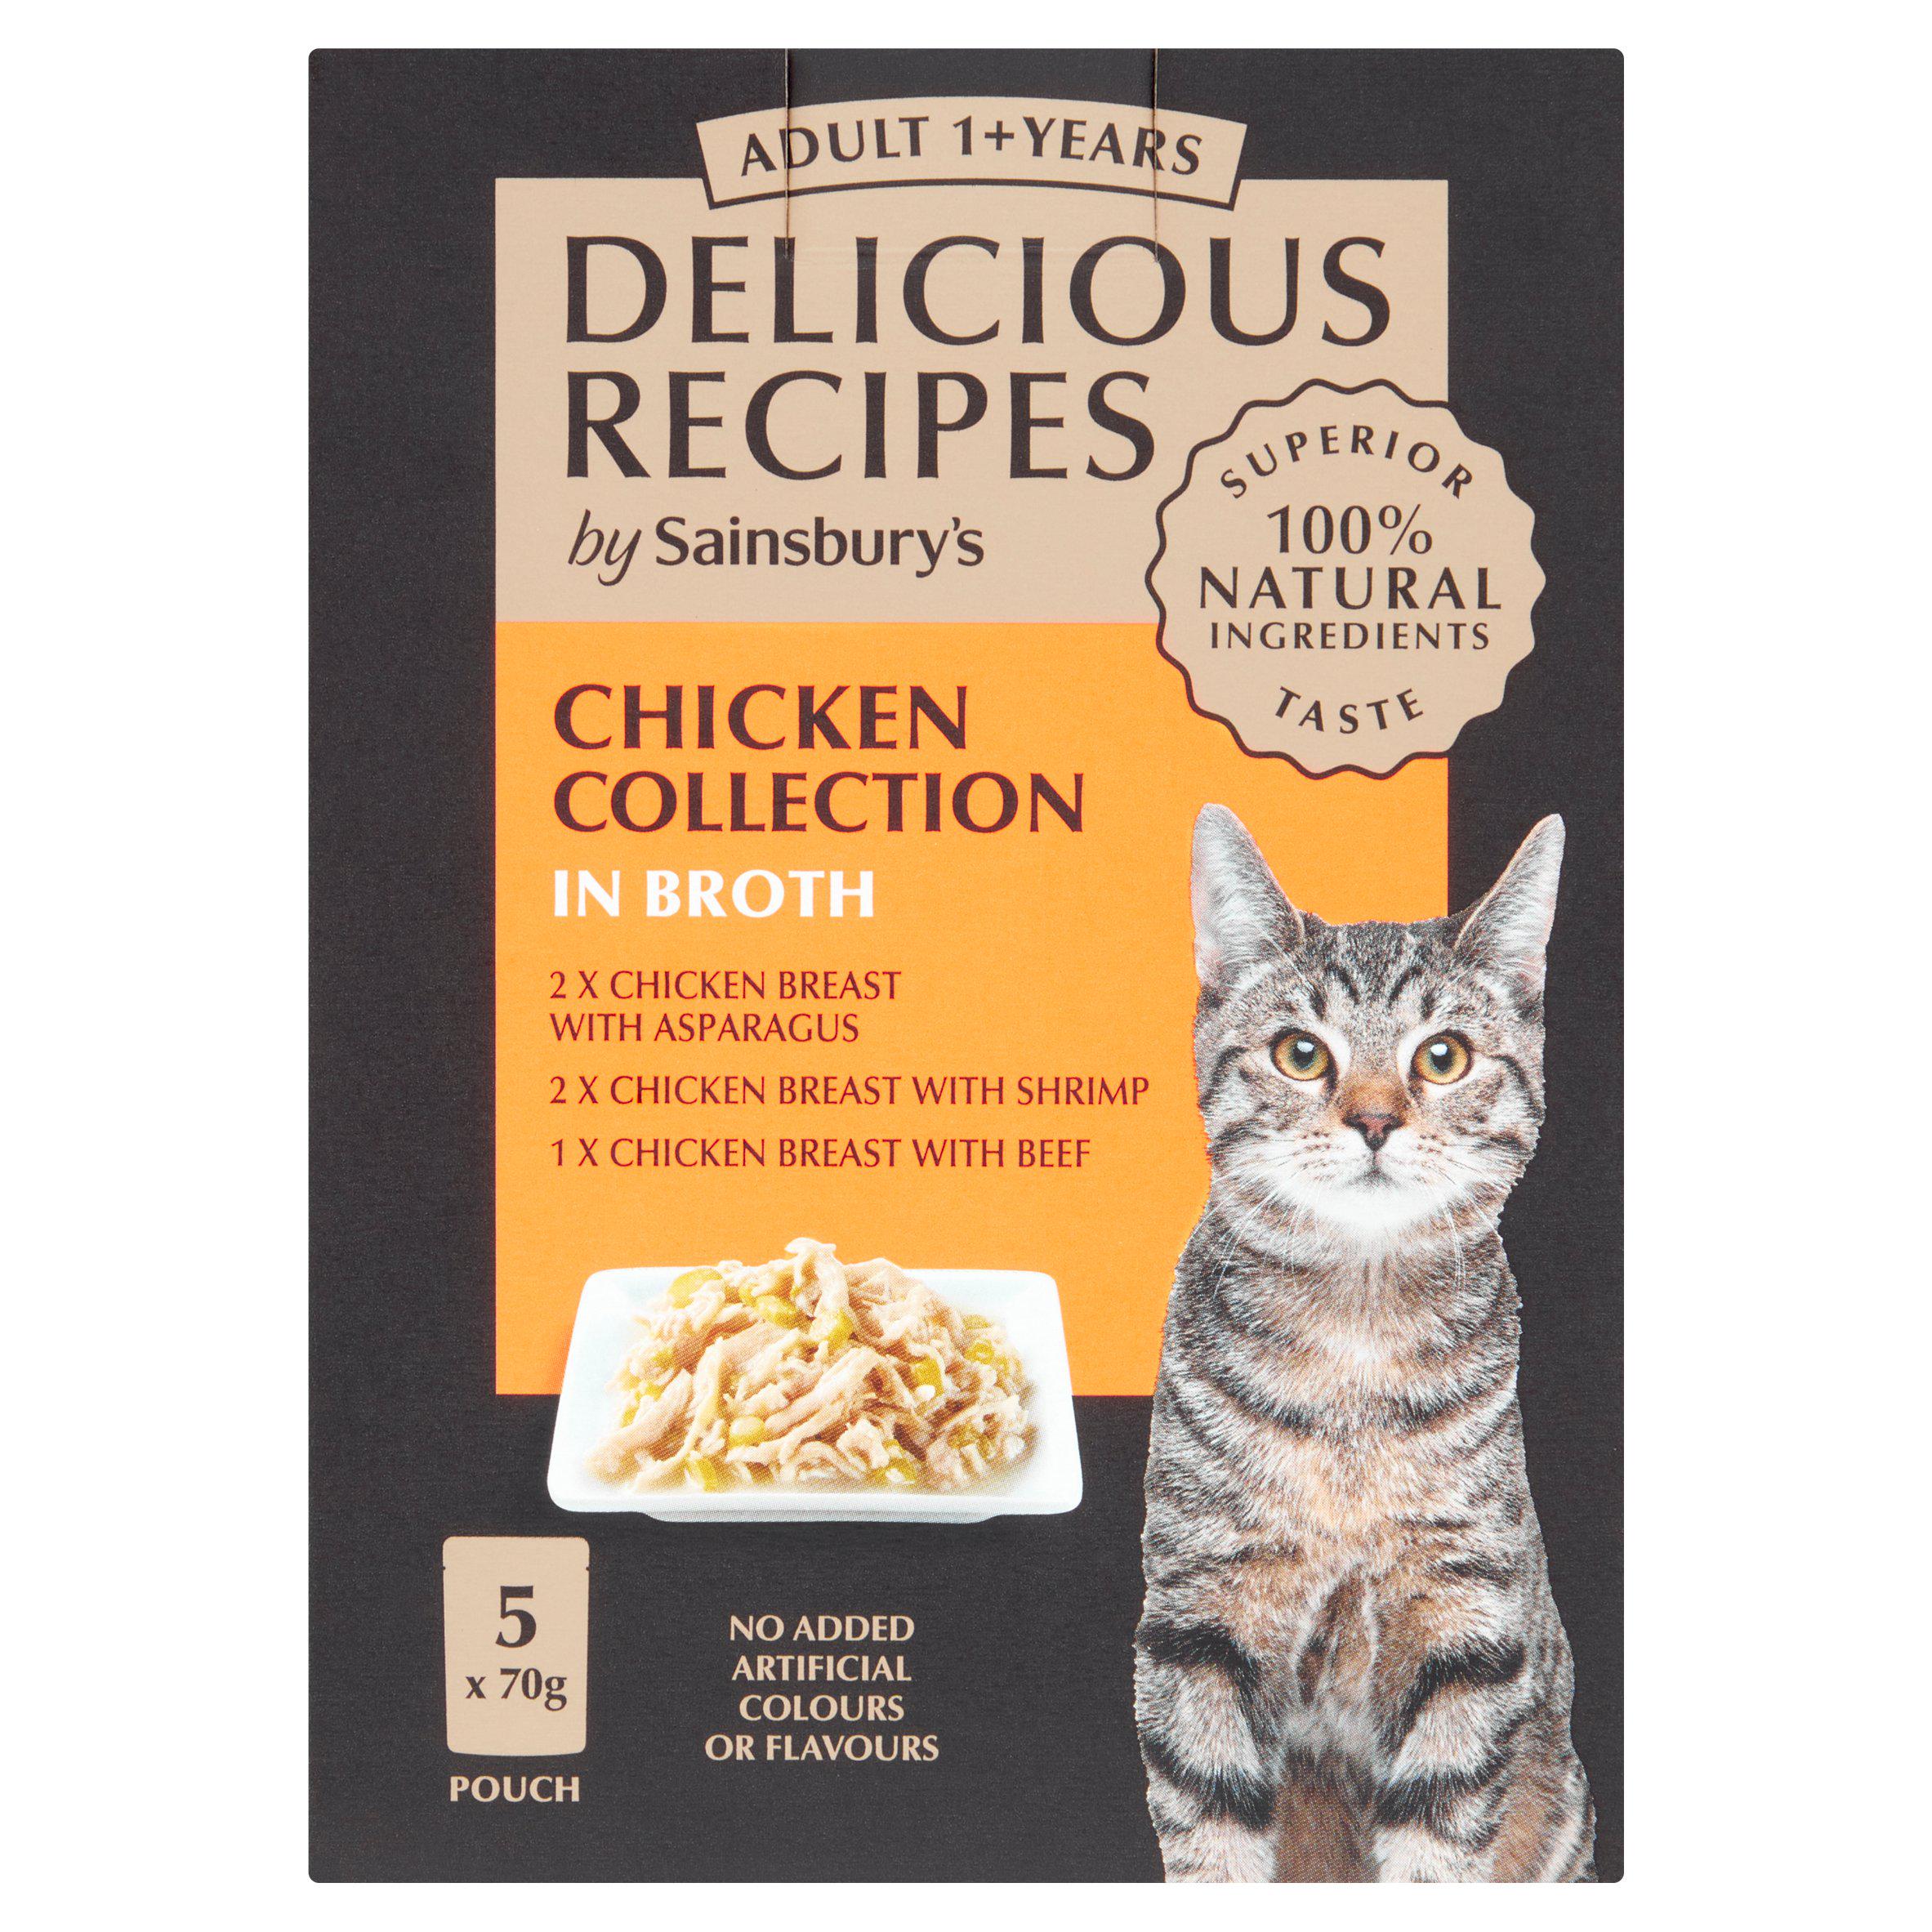 Sainsbury's Delicious Recipes Chicken Collection in Broth Adult 1+ Years 5x70g GOODS Sainsburys   